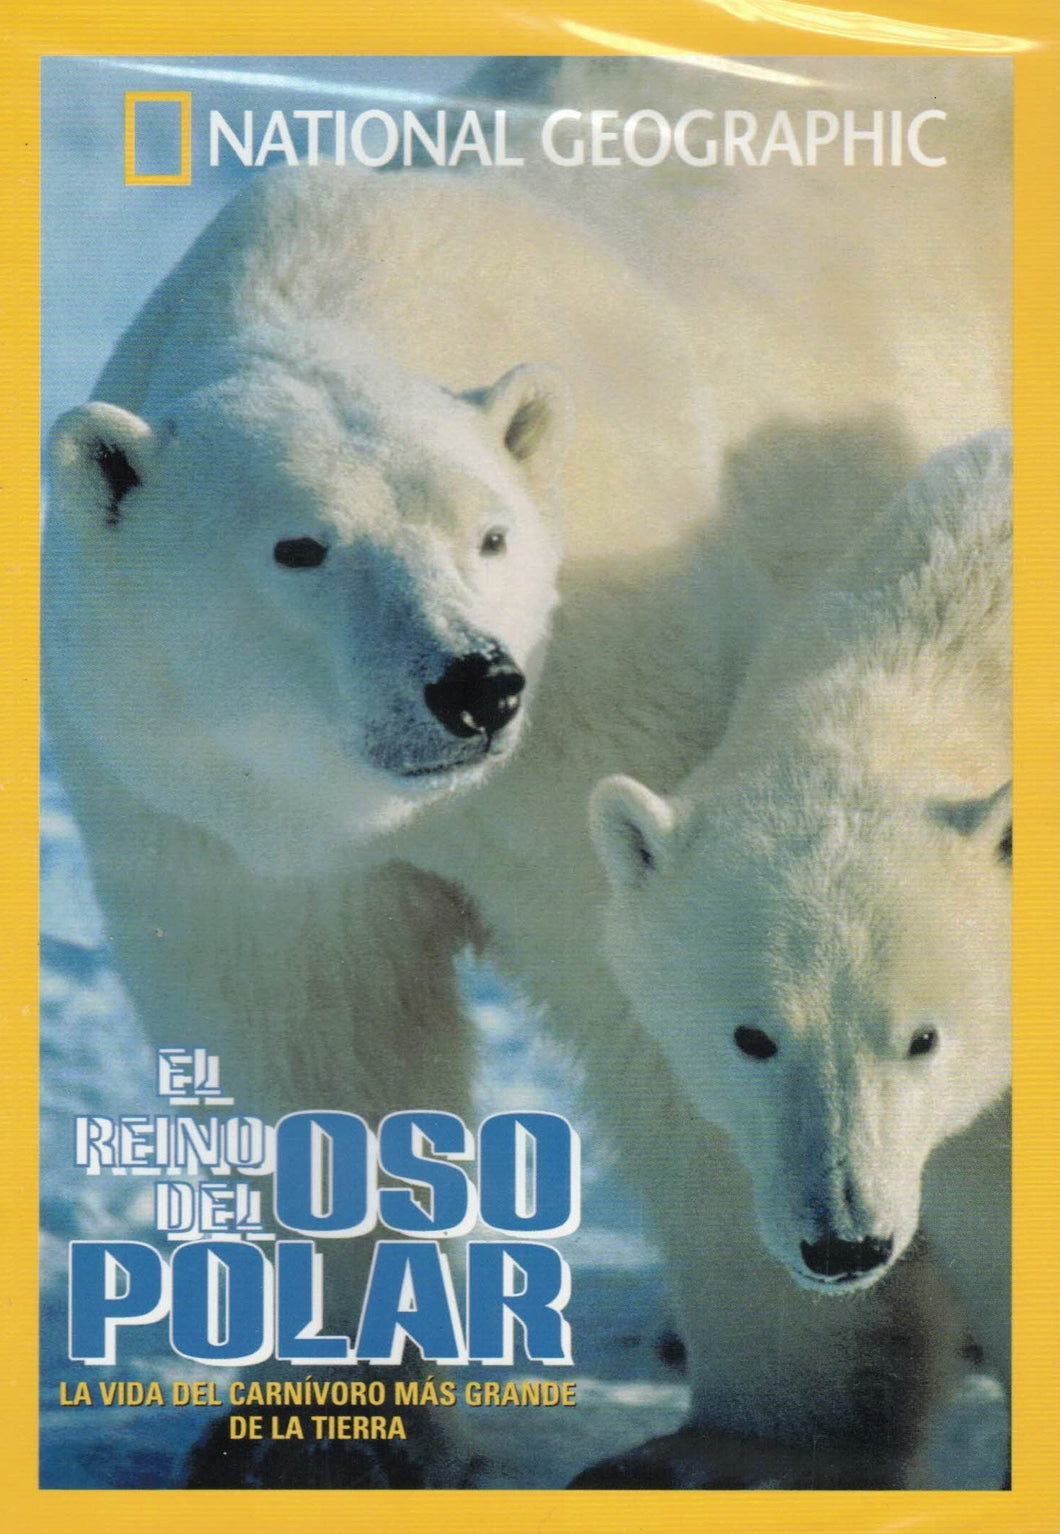 The Kingdom Of The Polar Bear - NATIONAL GEOGRAPHIC (DVD) C-198 (NEW)